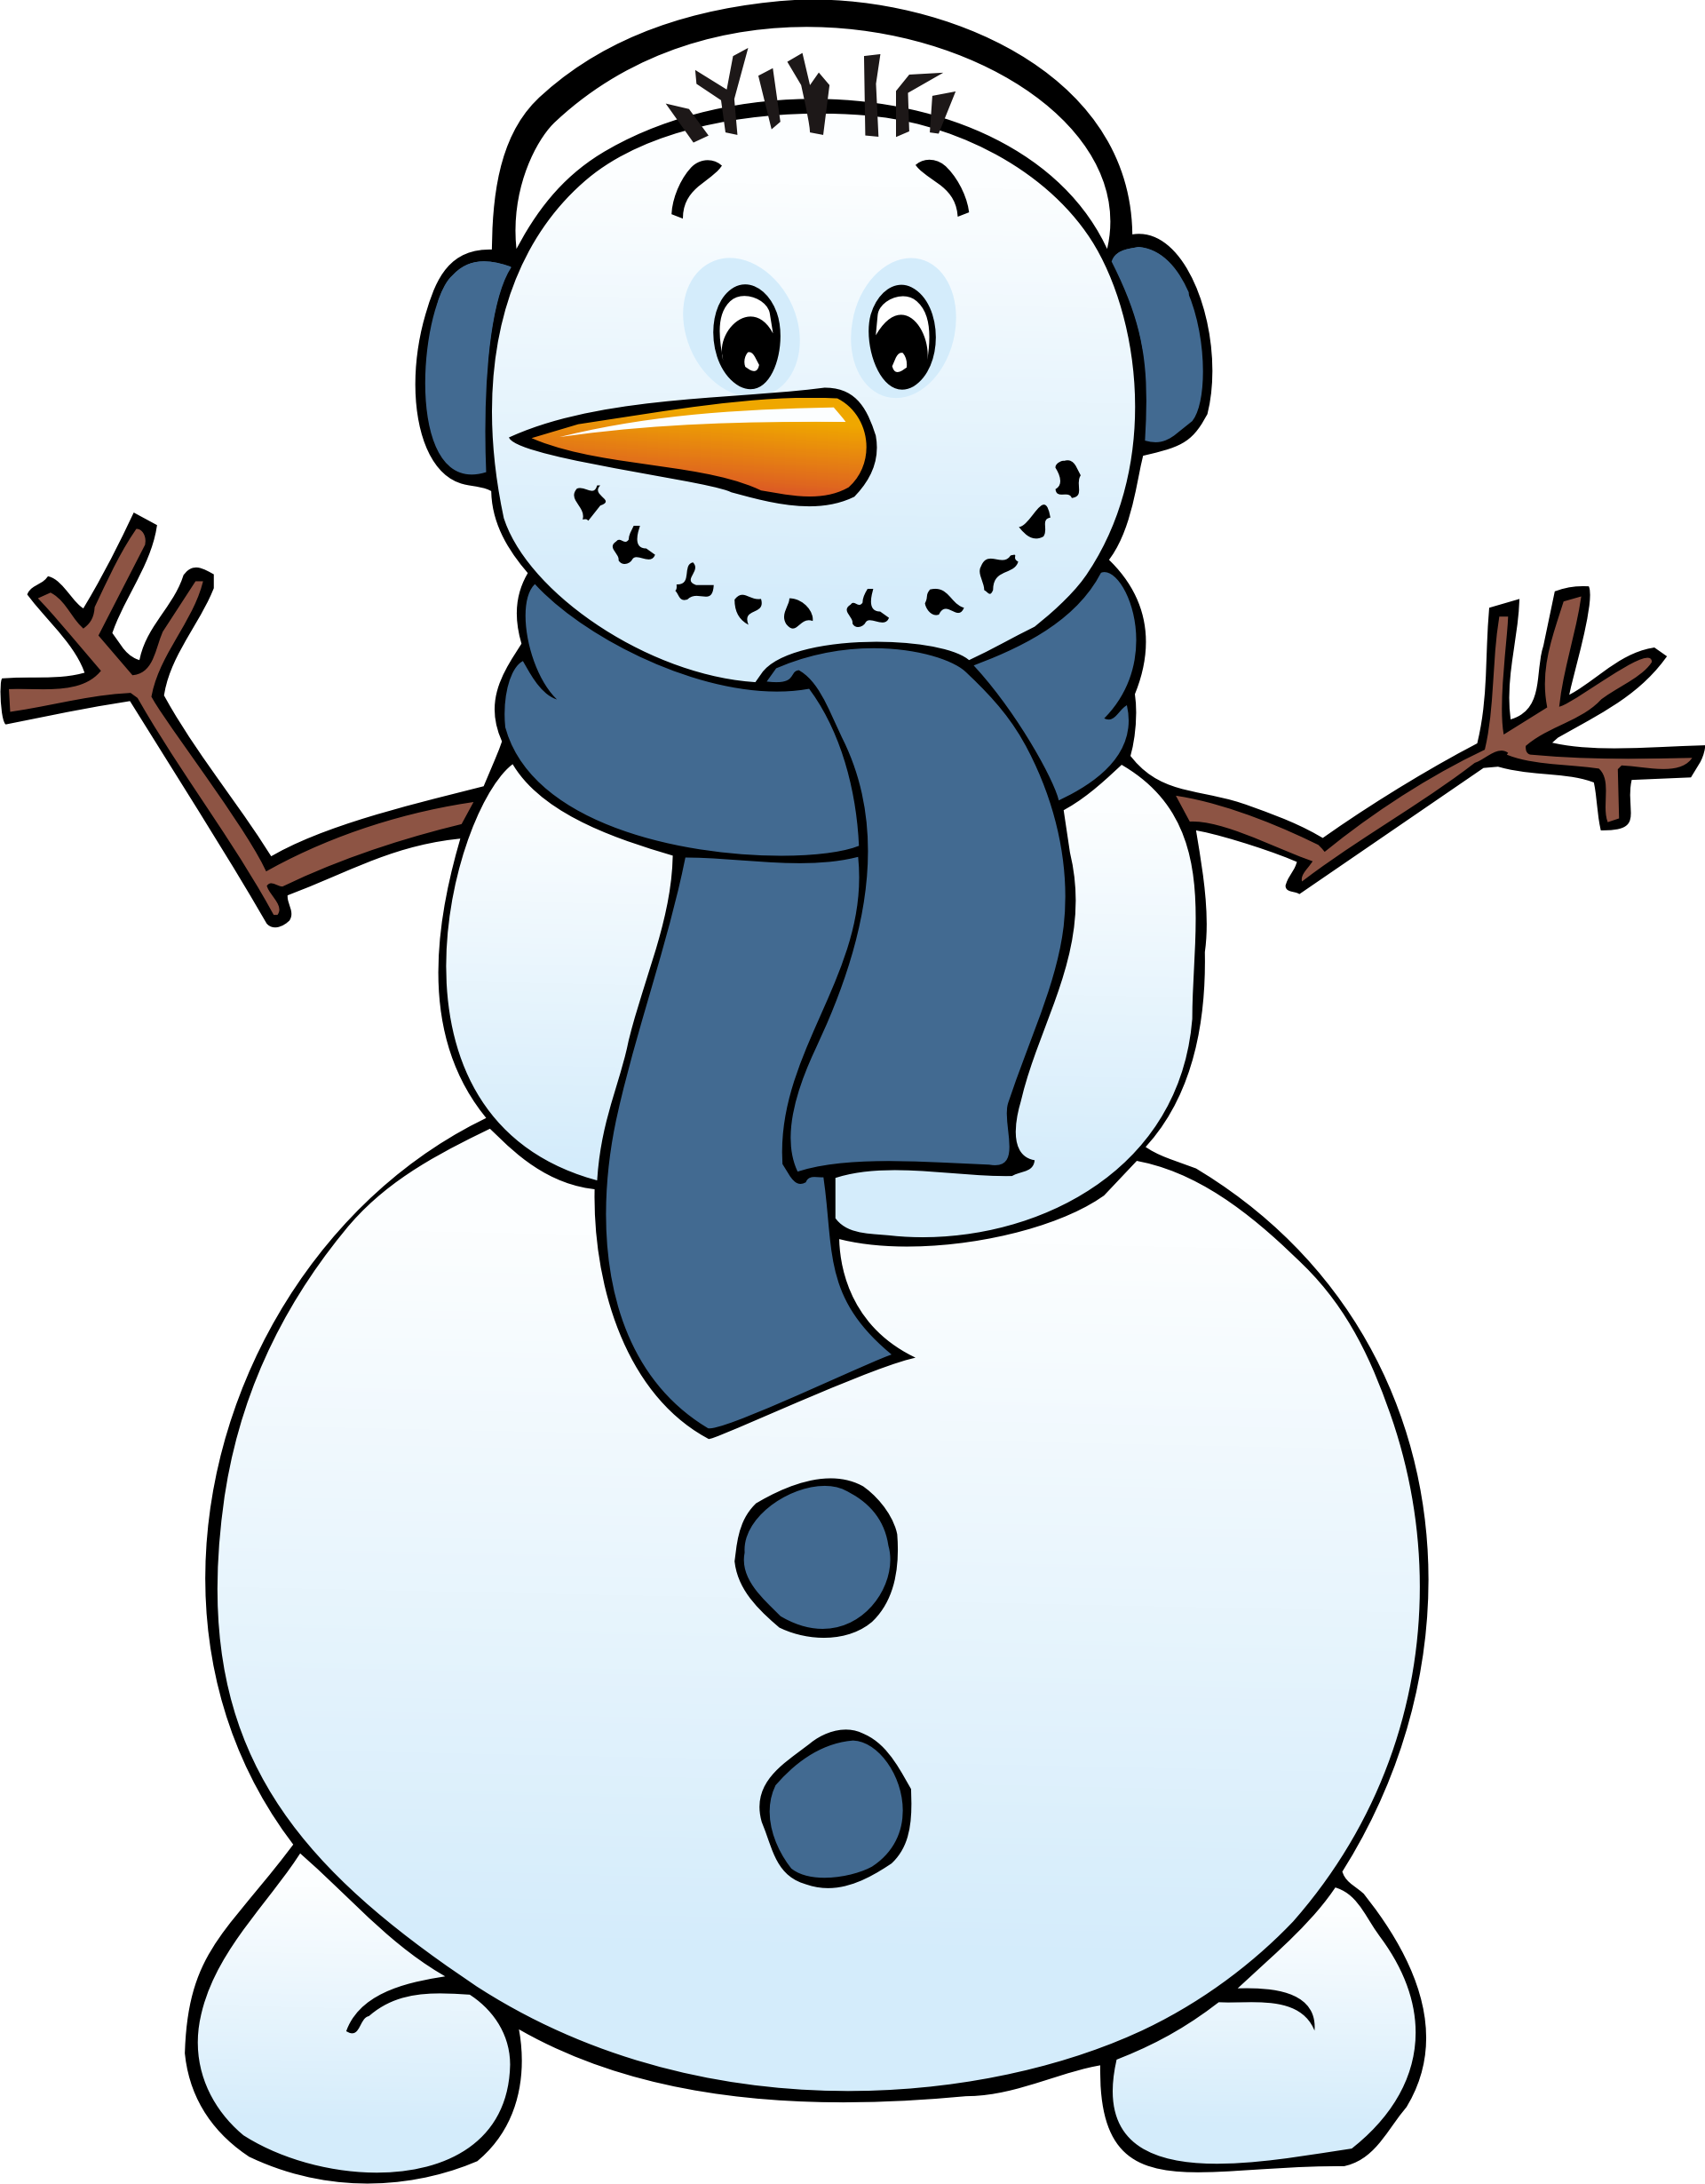 Snowfall live clipart download 